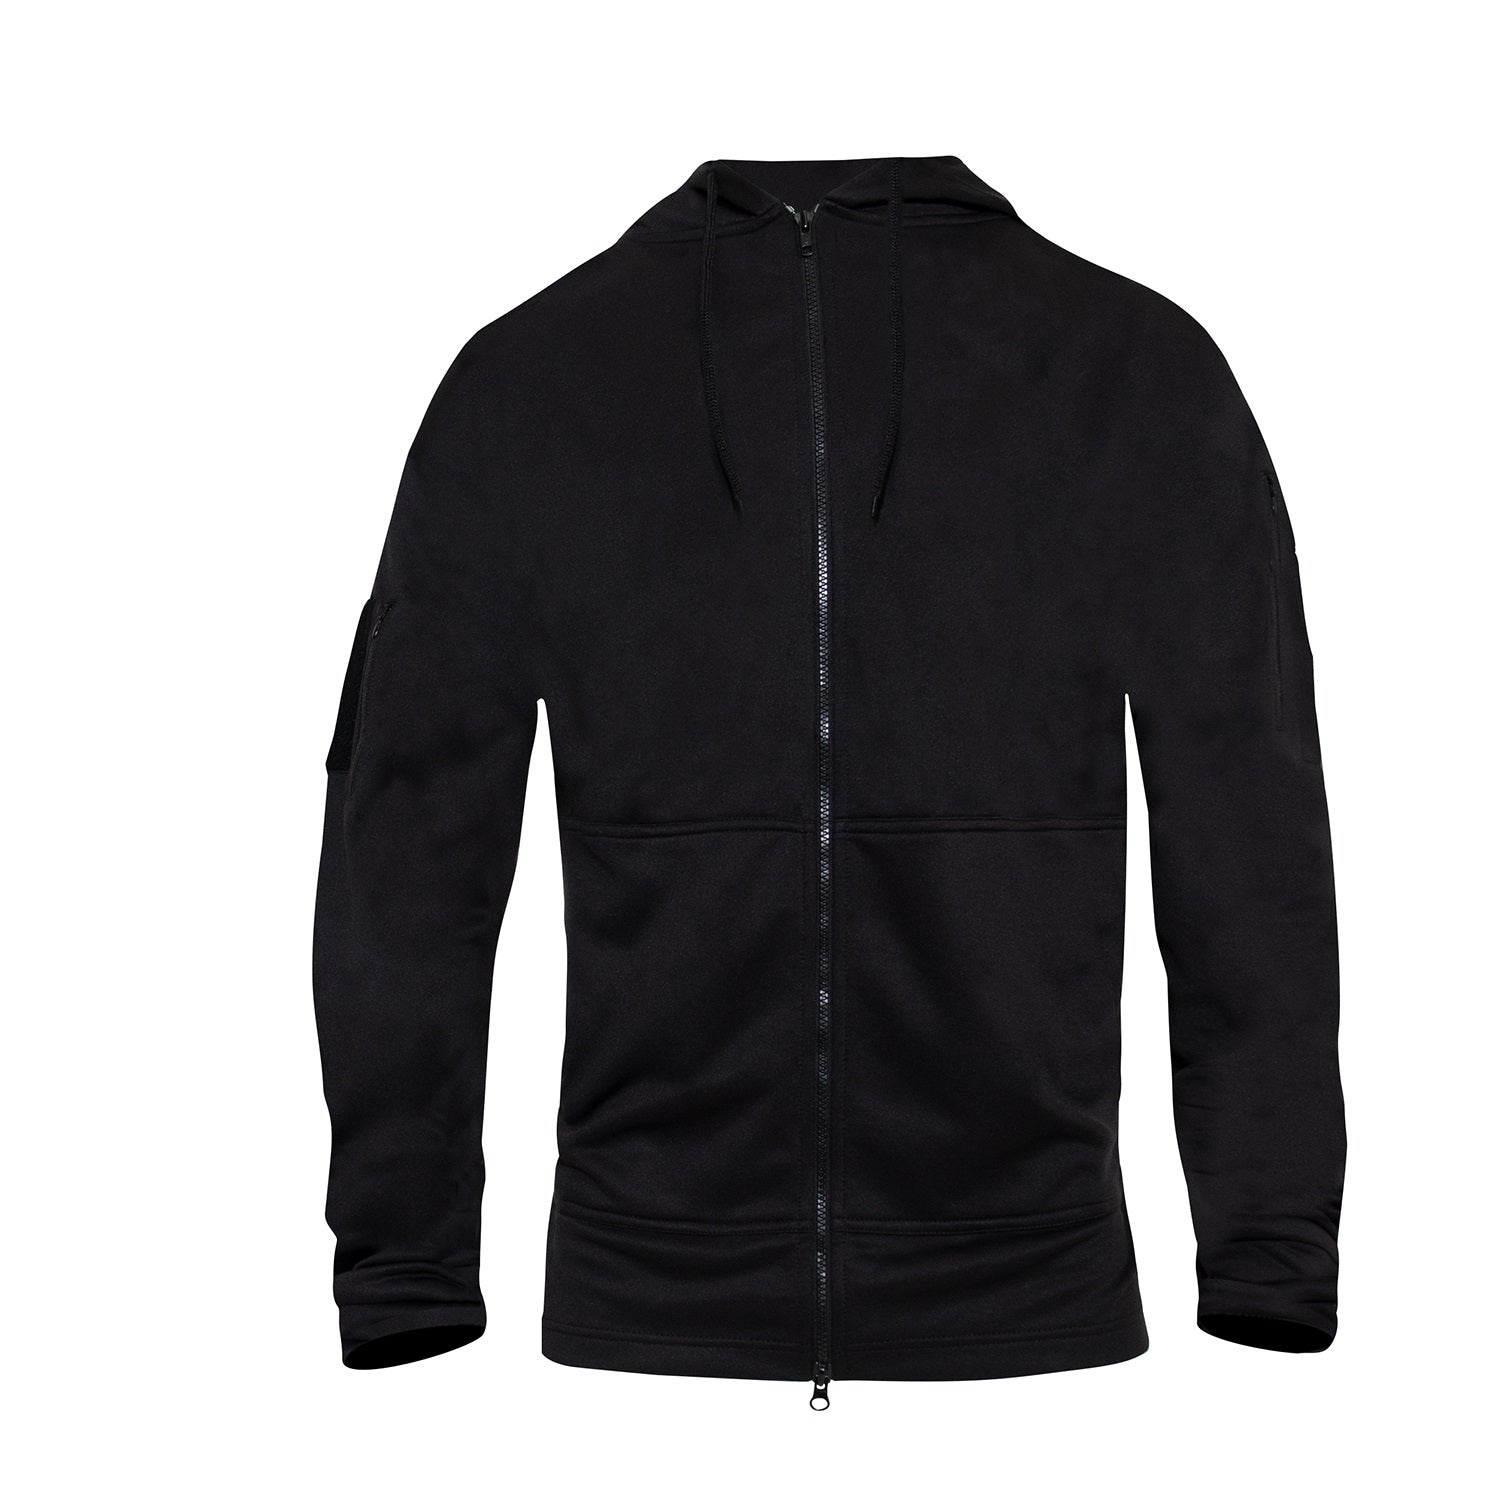 Rothco Concealed Carry Zippered Hoodie - Black